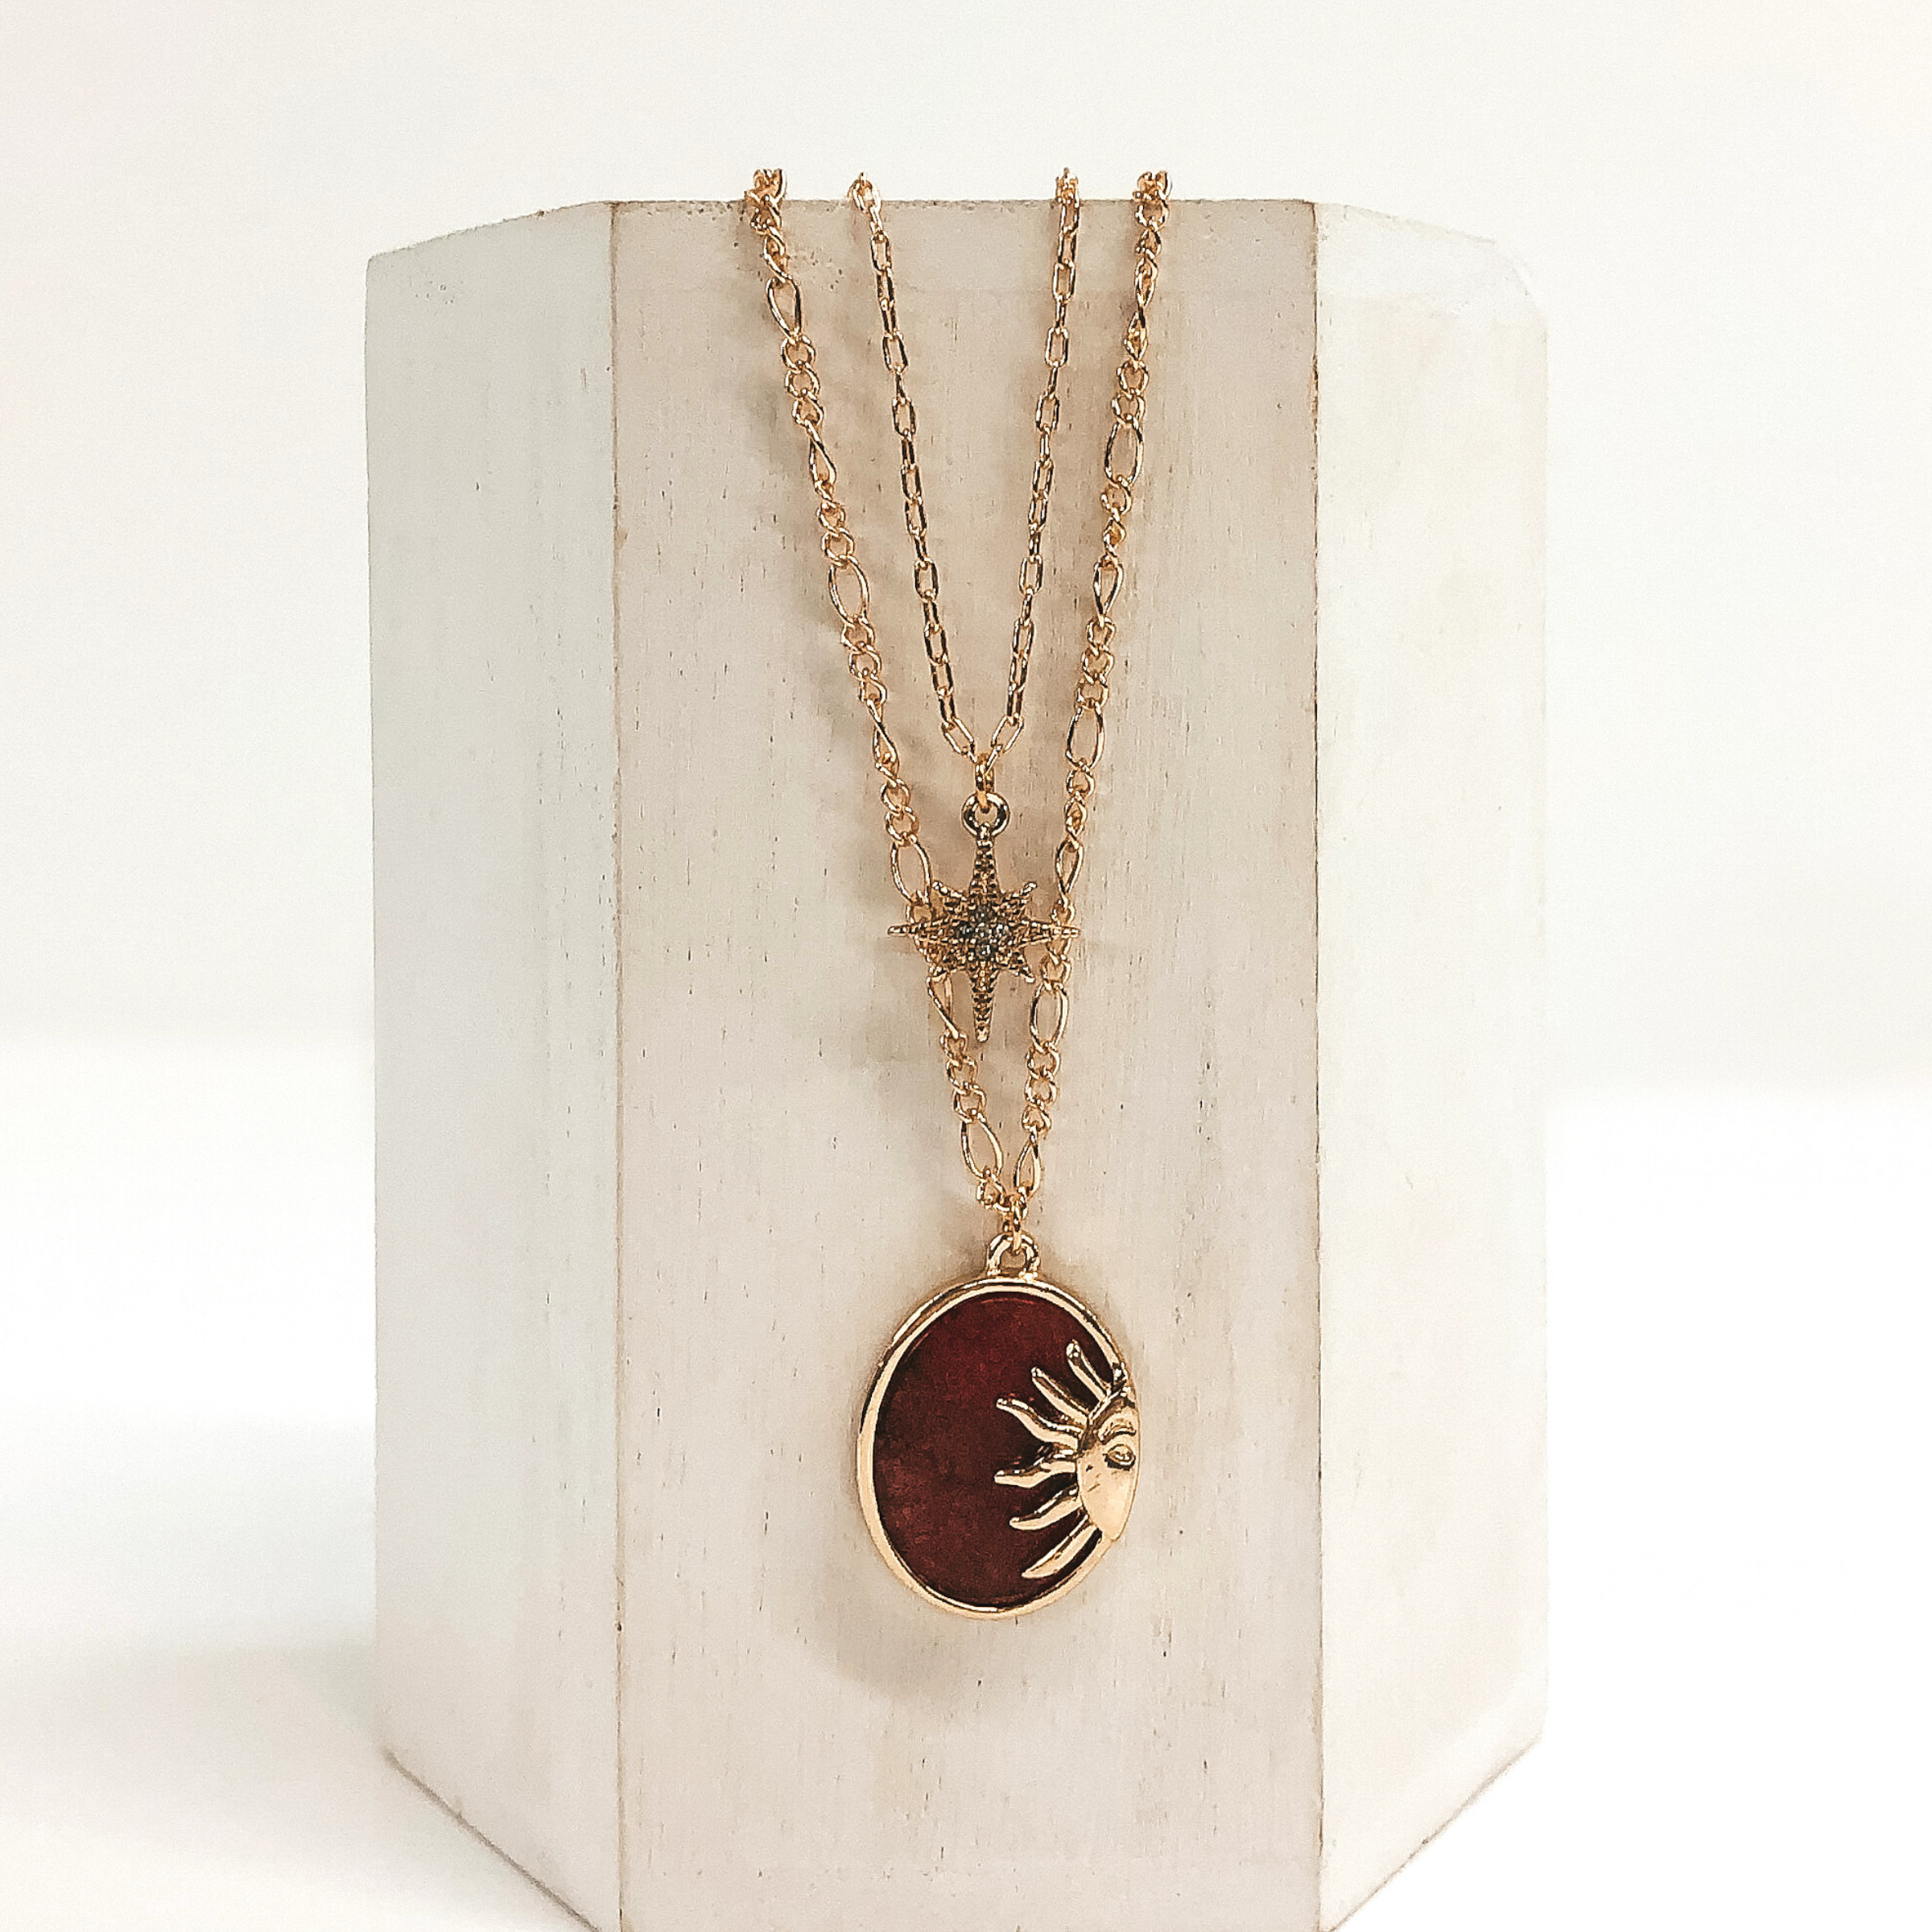 Double layered chain necklace in gold. The shorter strand has a gold star pendant with a center clear crystal and the longer strand has an oval burgundy stone pendant with a half sun gold charm. This necklace is pictured hanging on a white block on a white background. 